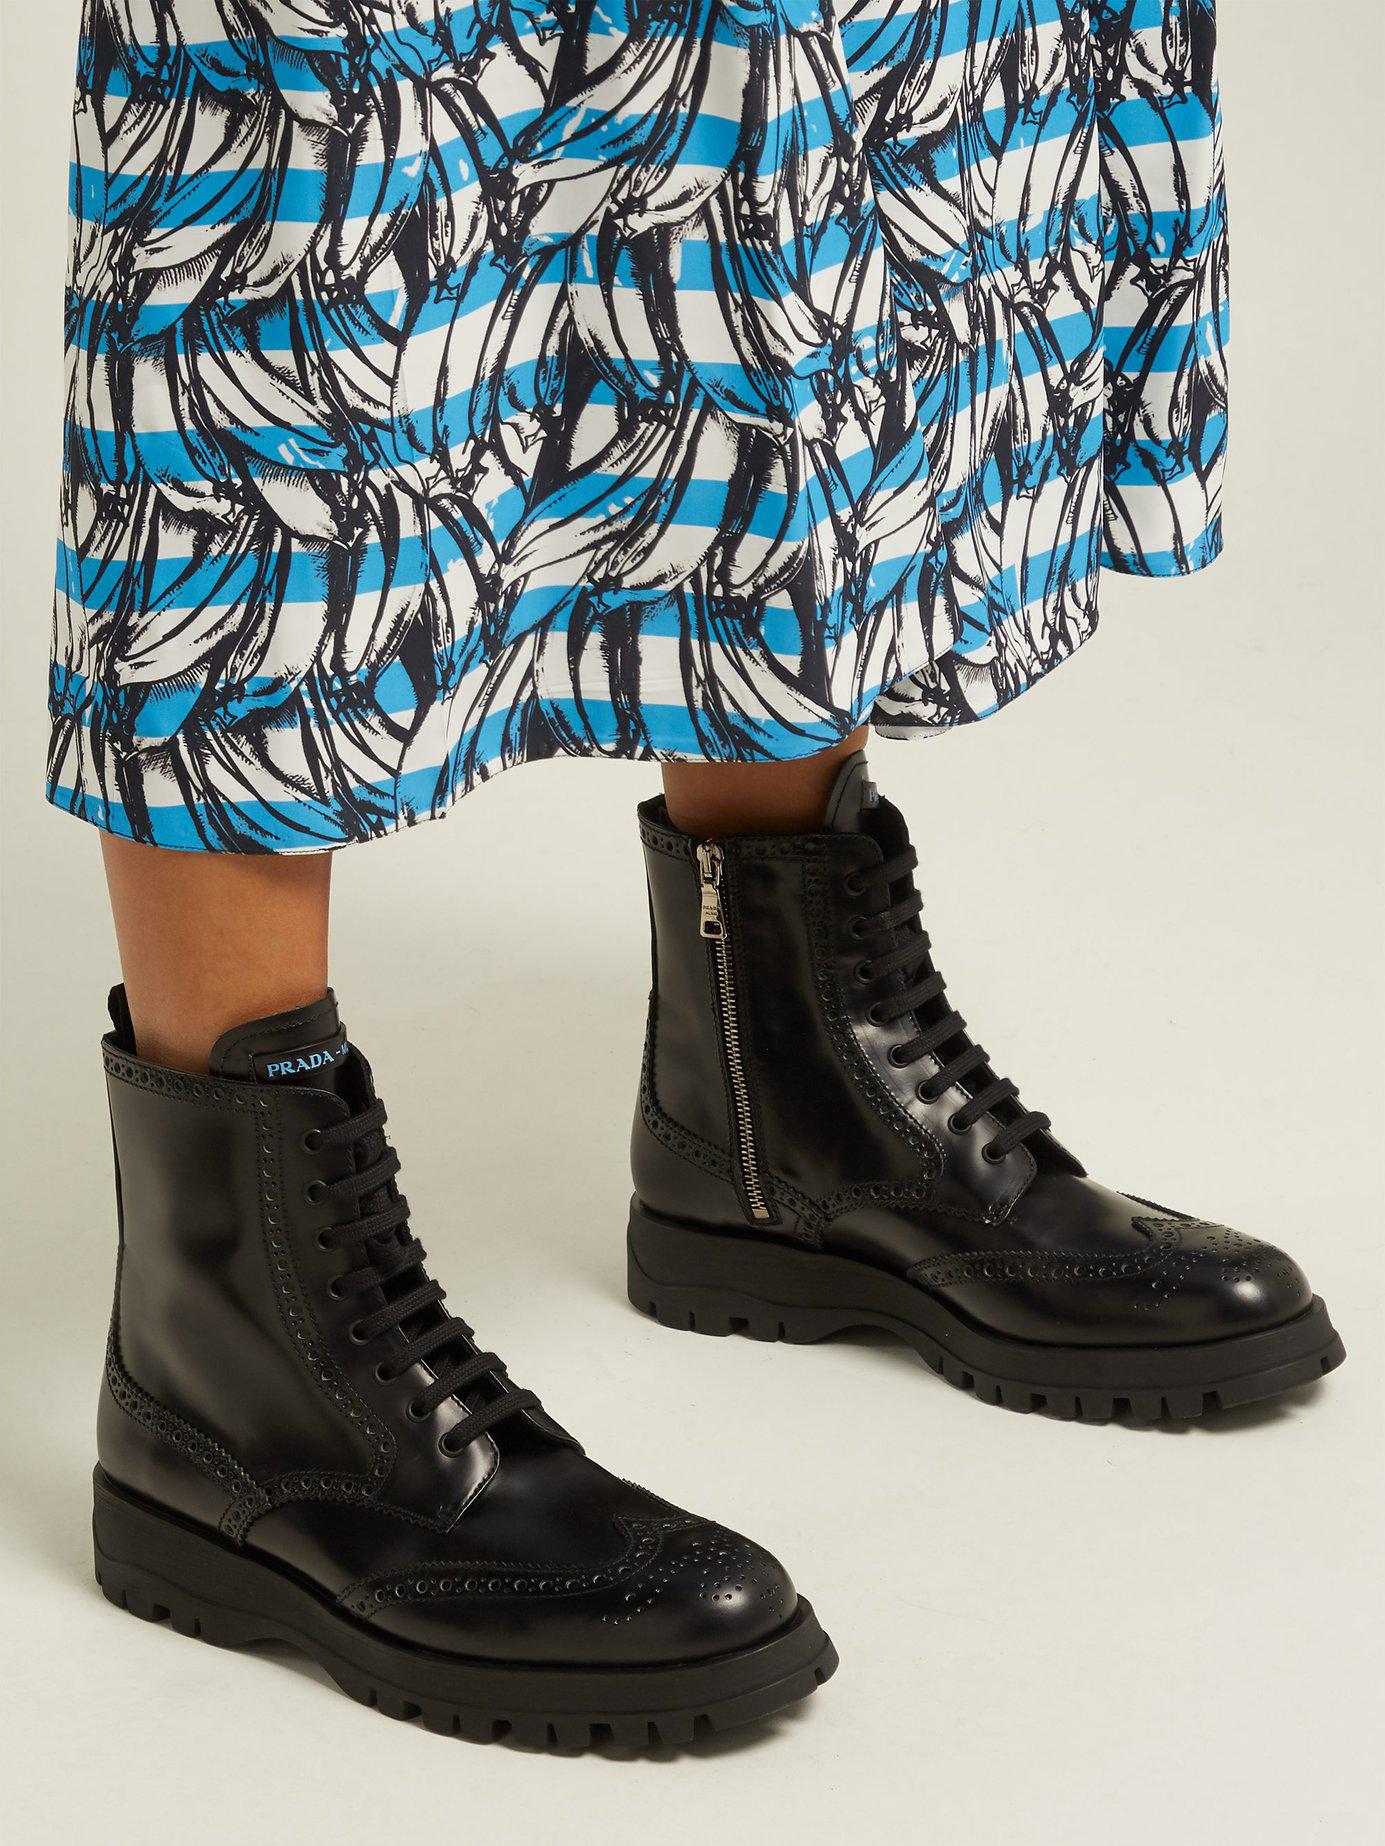 Prada Lace-up Leather Brogue Ankle Boots in Black | Lyst